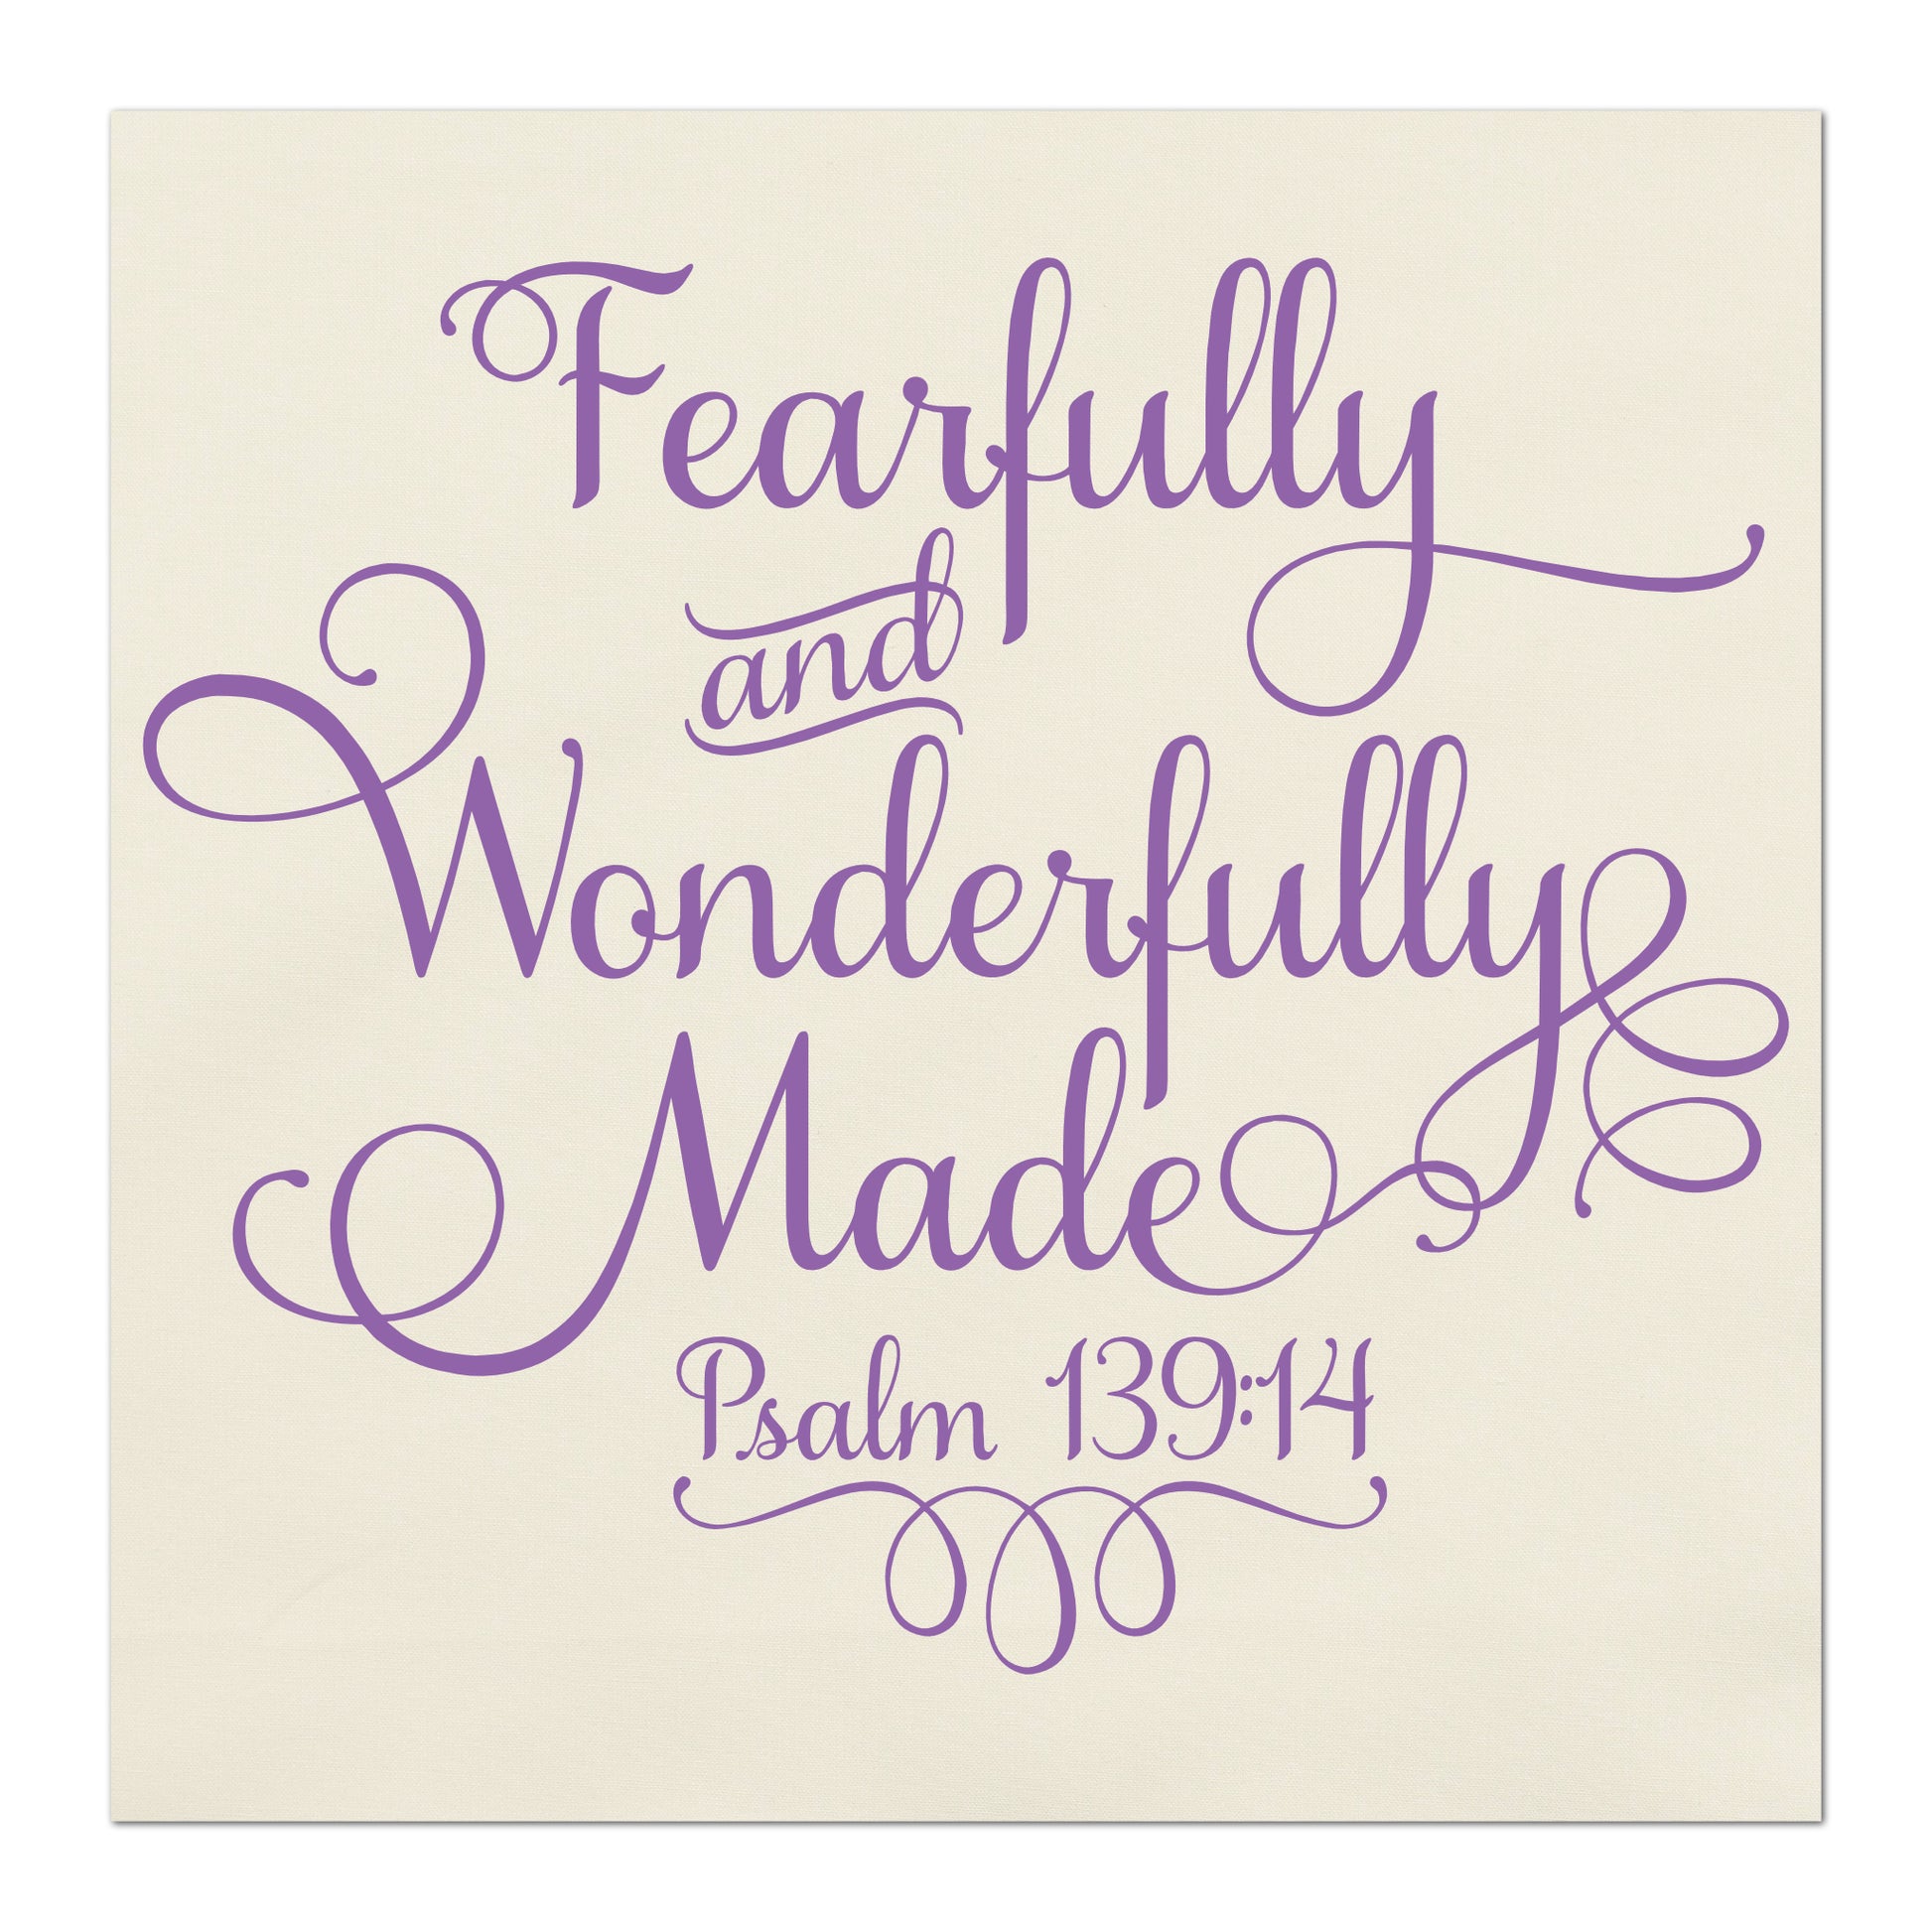 I am fearfully and wonderfully made - Psalm 139:14, Fabric Panel Print, Quilt Block, Scripture Fabric, Girl